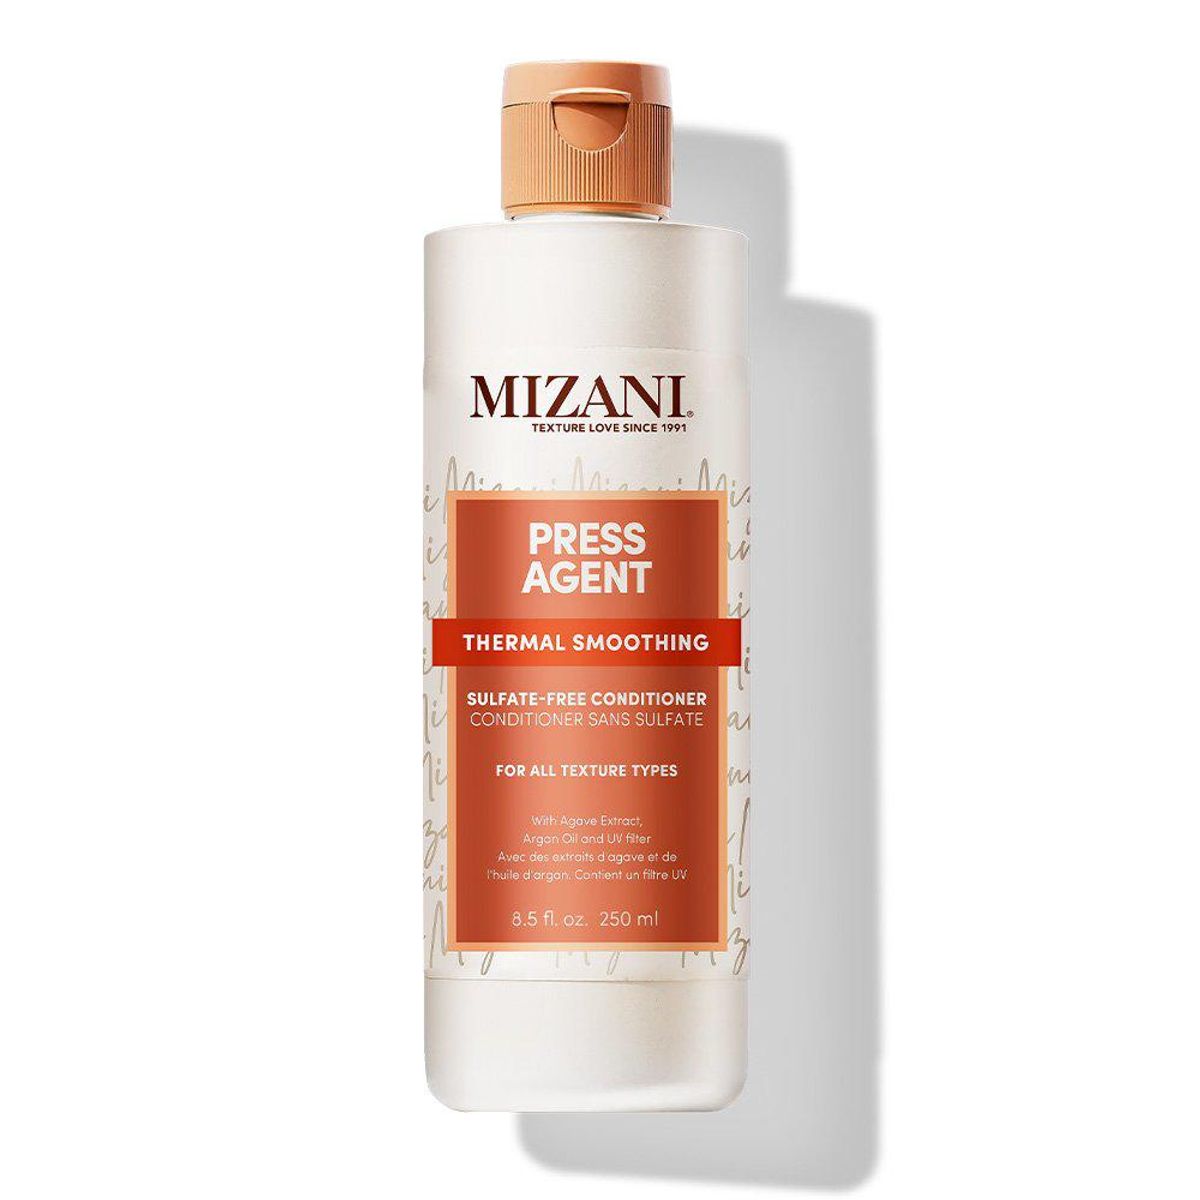 Press Agent Thermal Smoothing Sulfate Free Conditioner